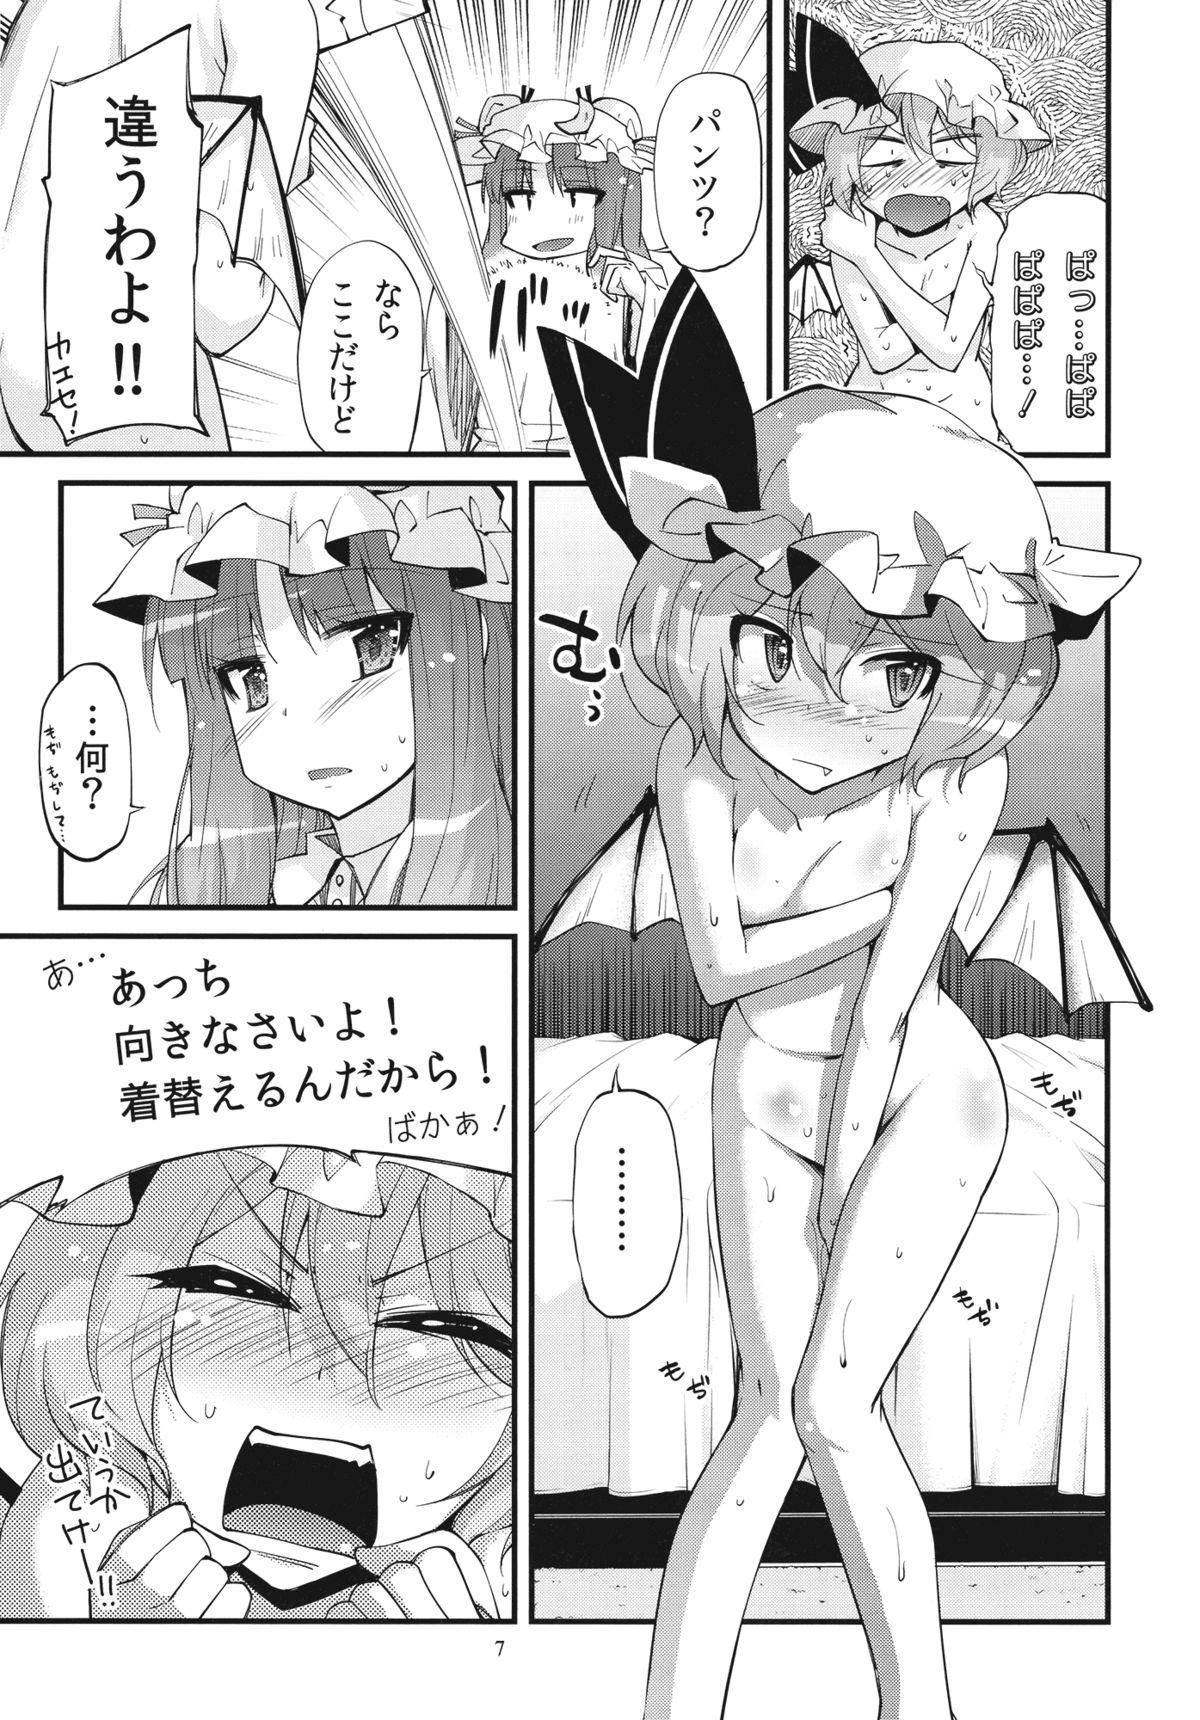 Khmer .REC - Touhou project Pussy Lick - Page 7